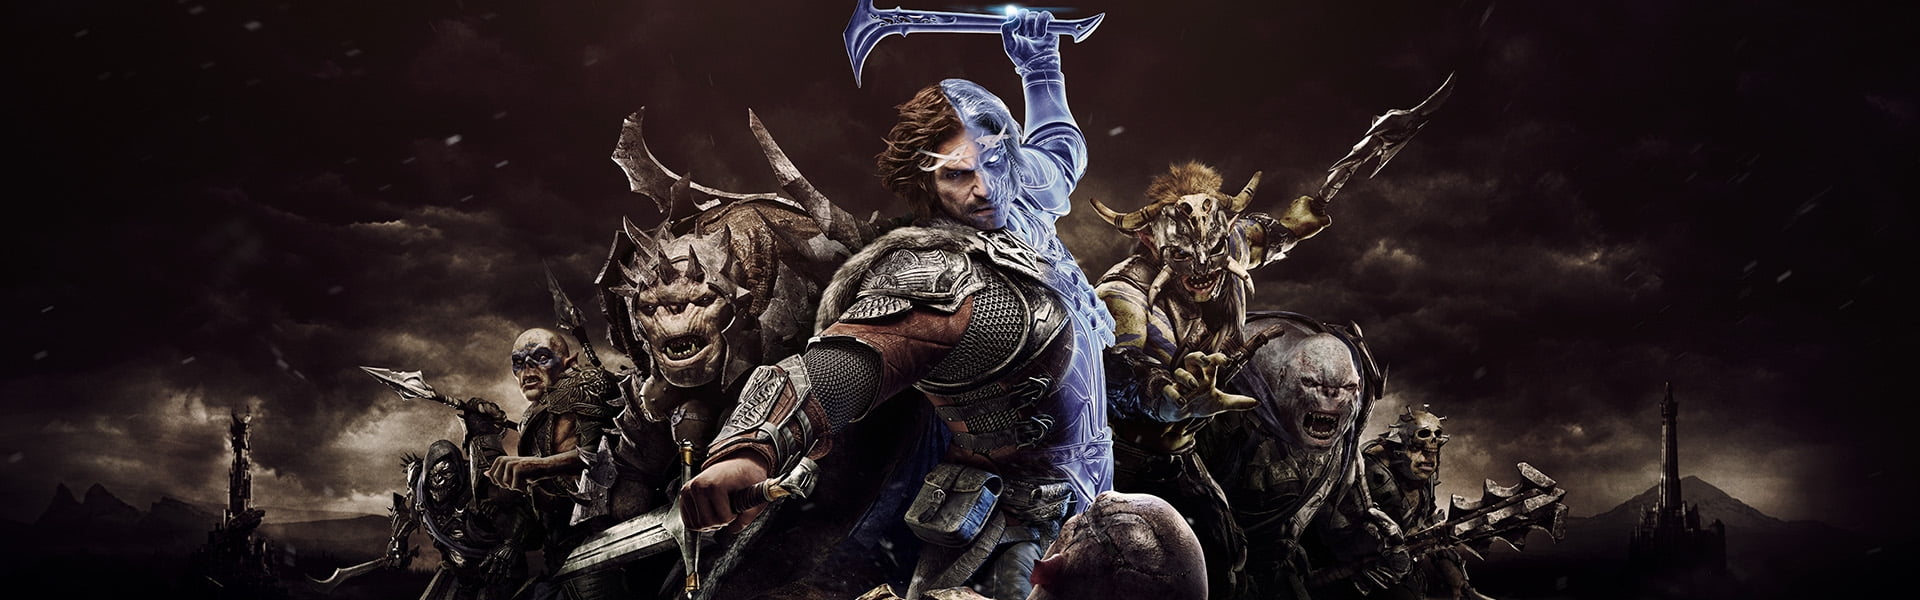 Middle Earth: Shadow of War Review 14